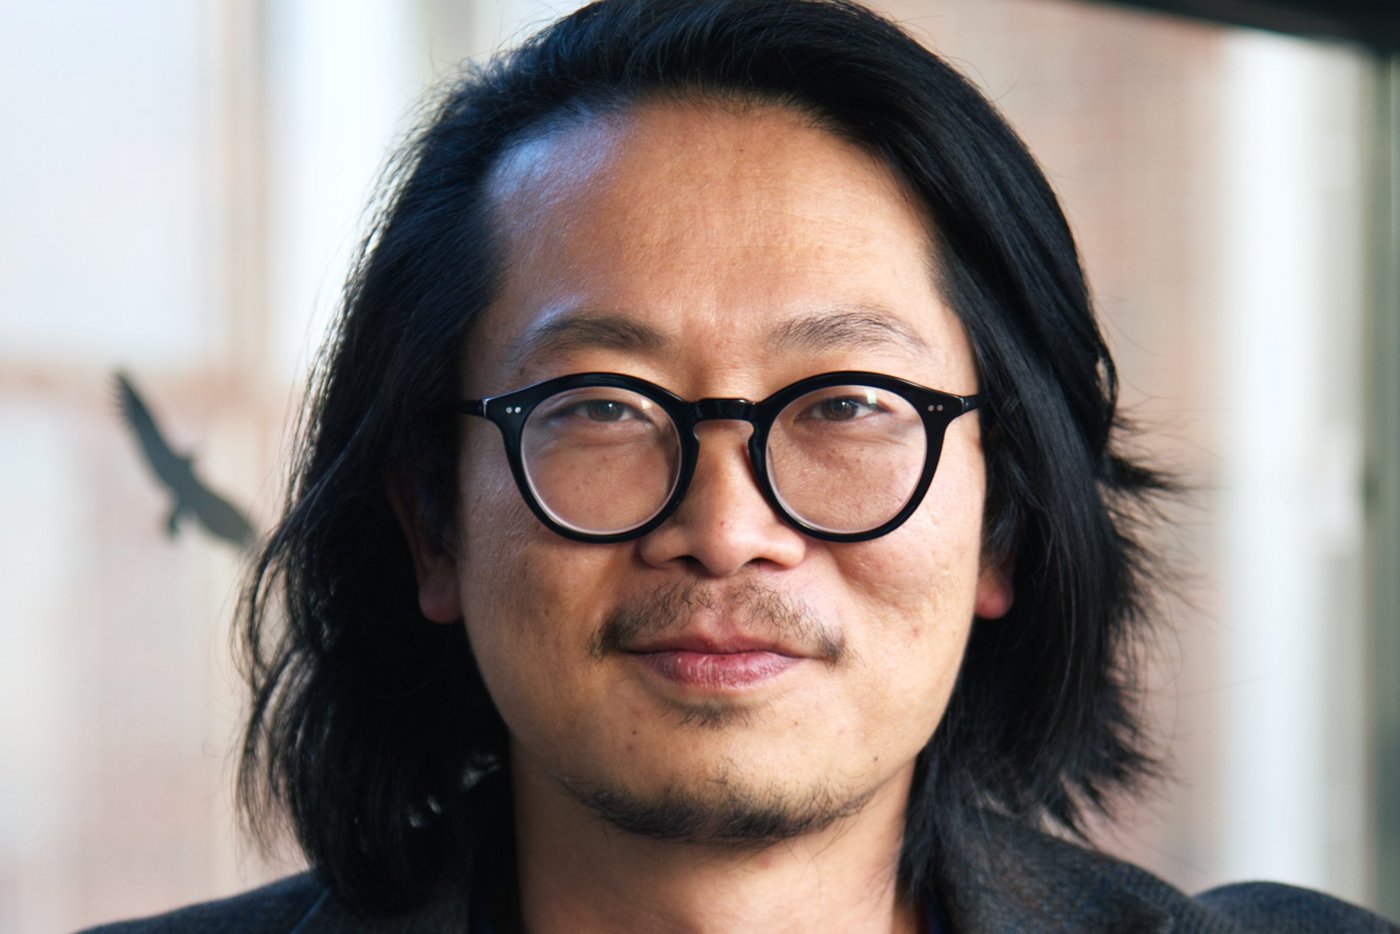 Direct portrait of a self-confident middle-aged researcher, with dark-rimmed glasses and slight beard growth, Asian or Asian-read, looking kindly into the camera.